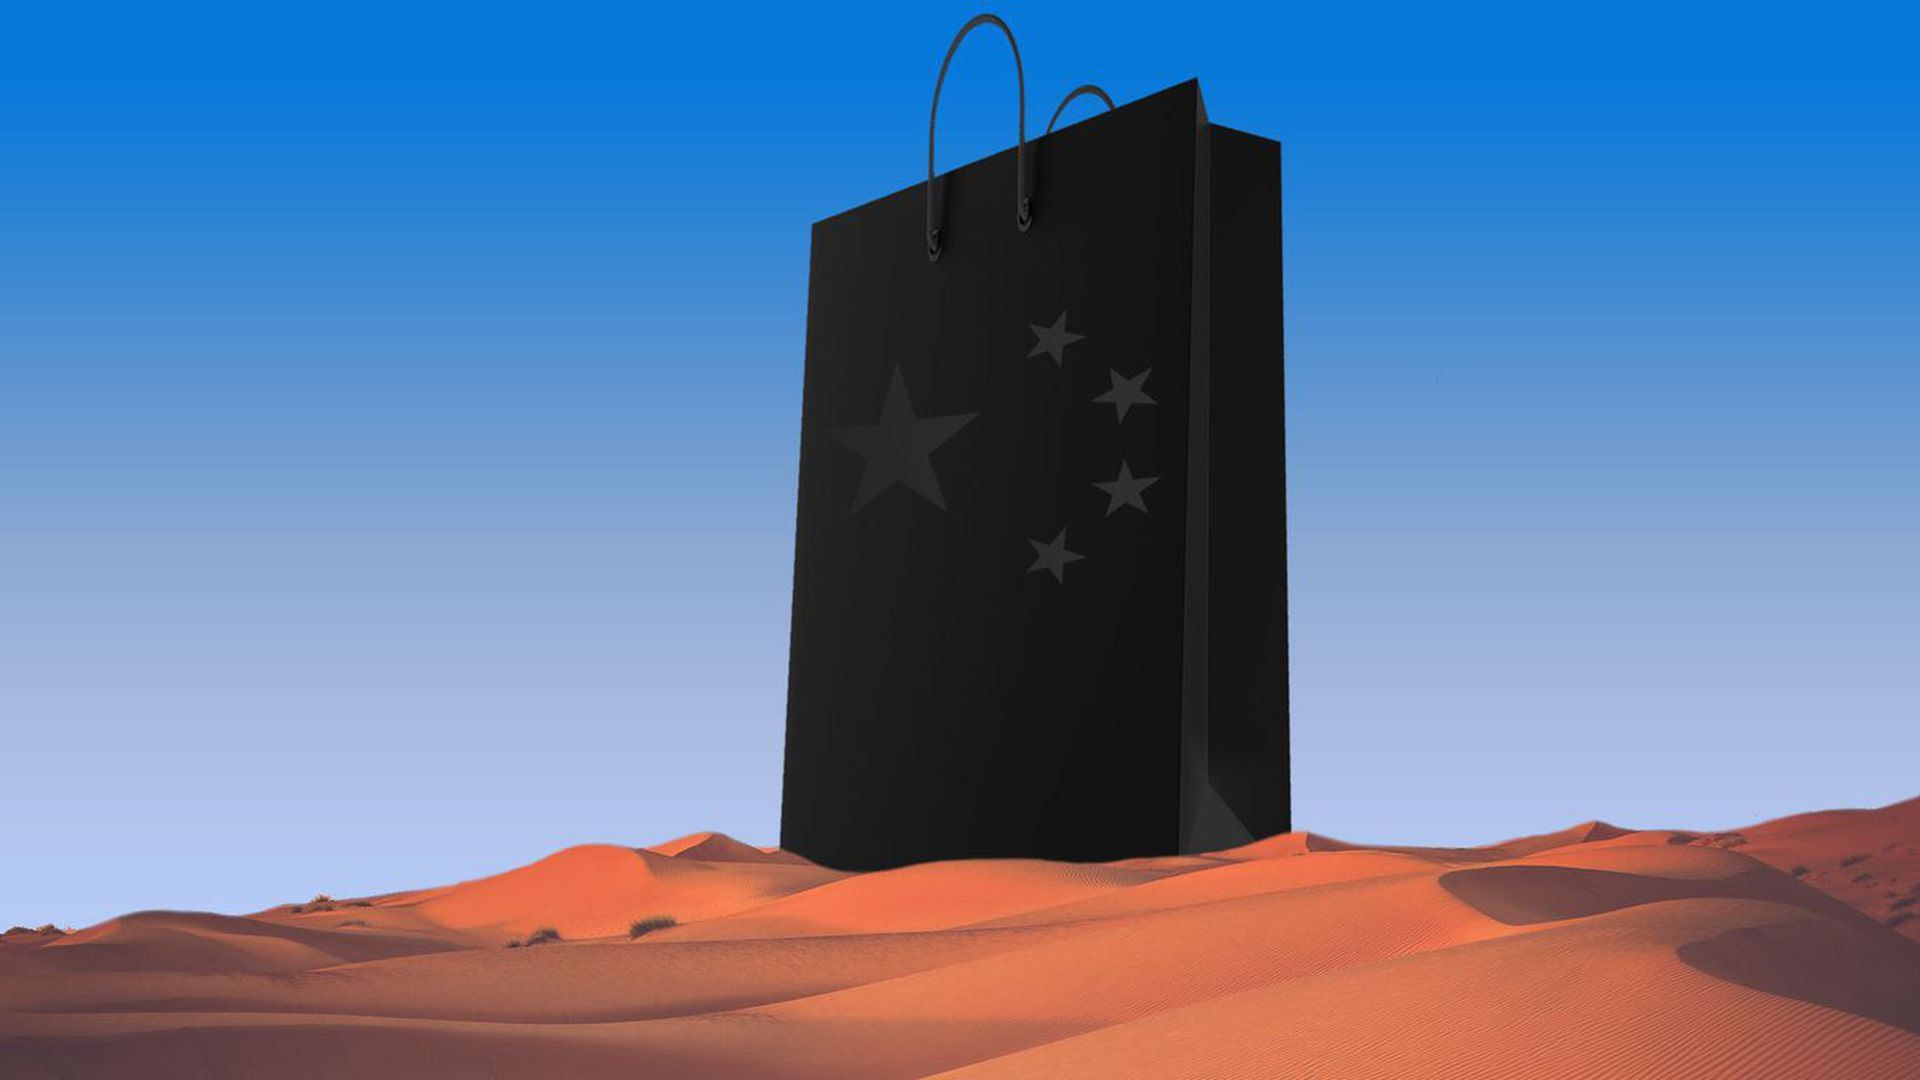 illustration of a black grocery bag with chinese stars on it in the middle of the desert